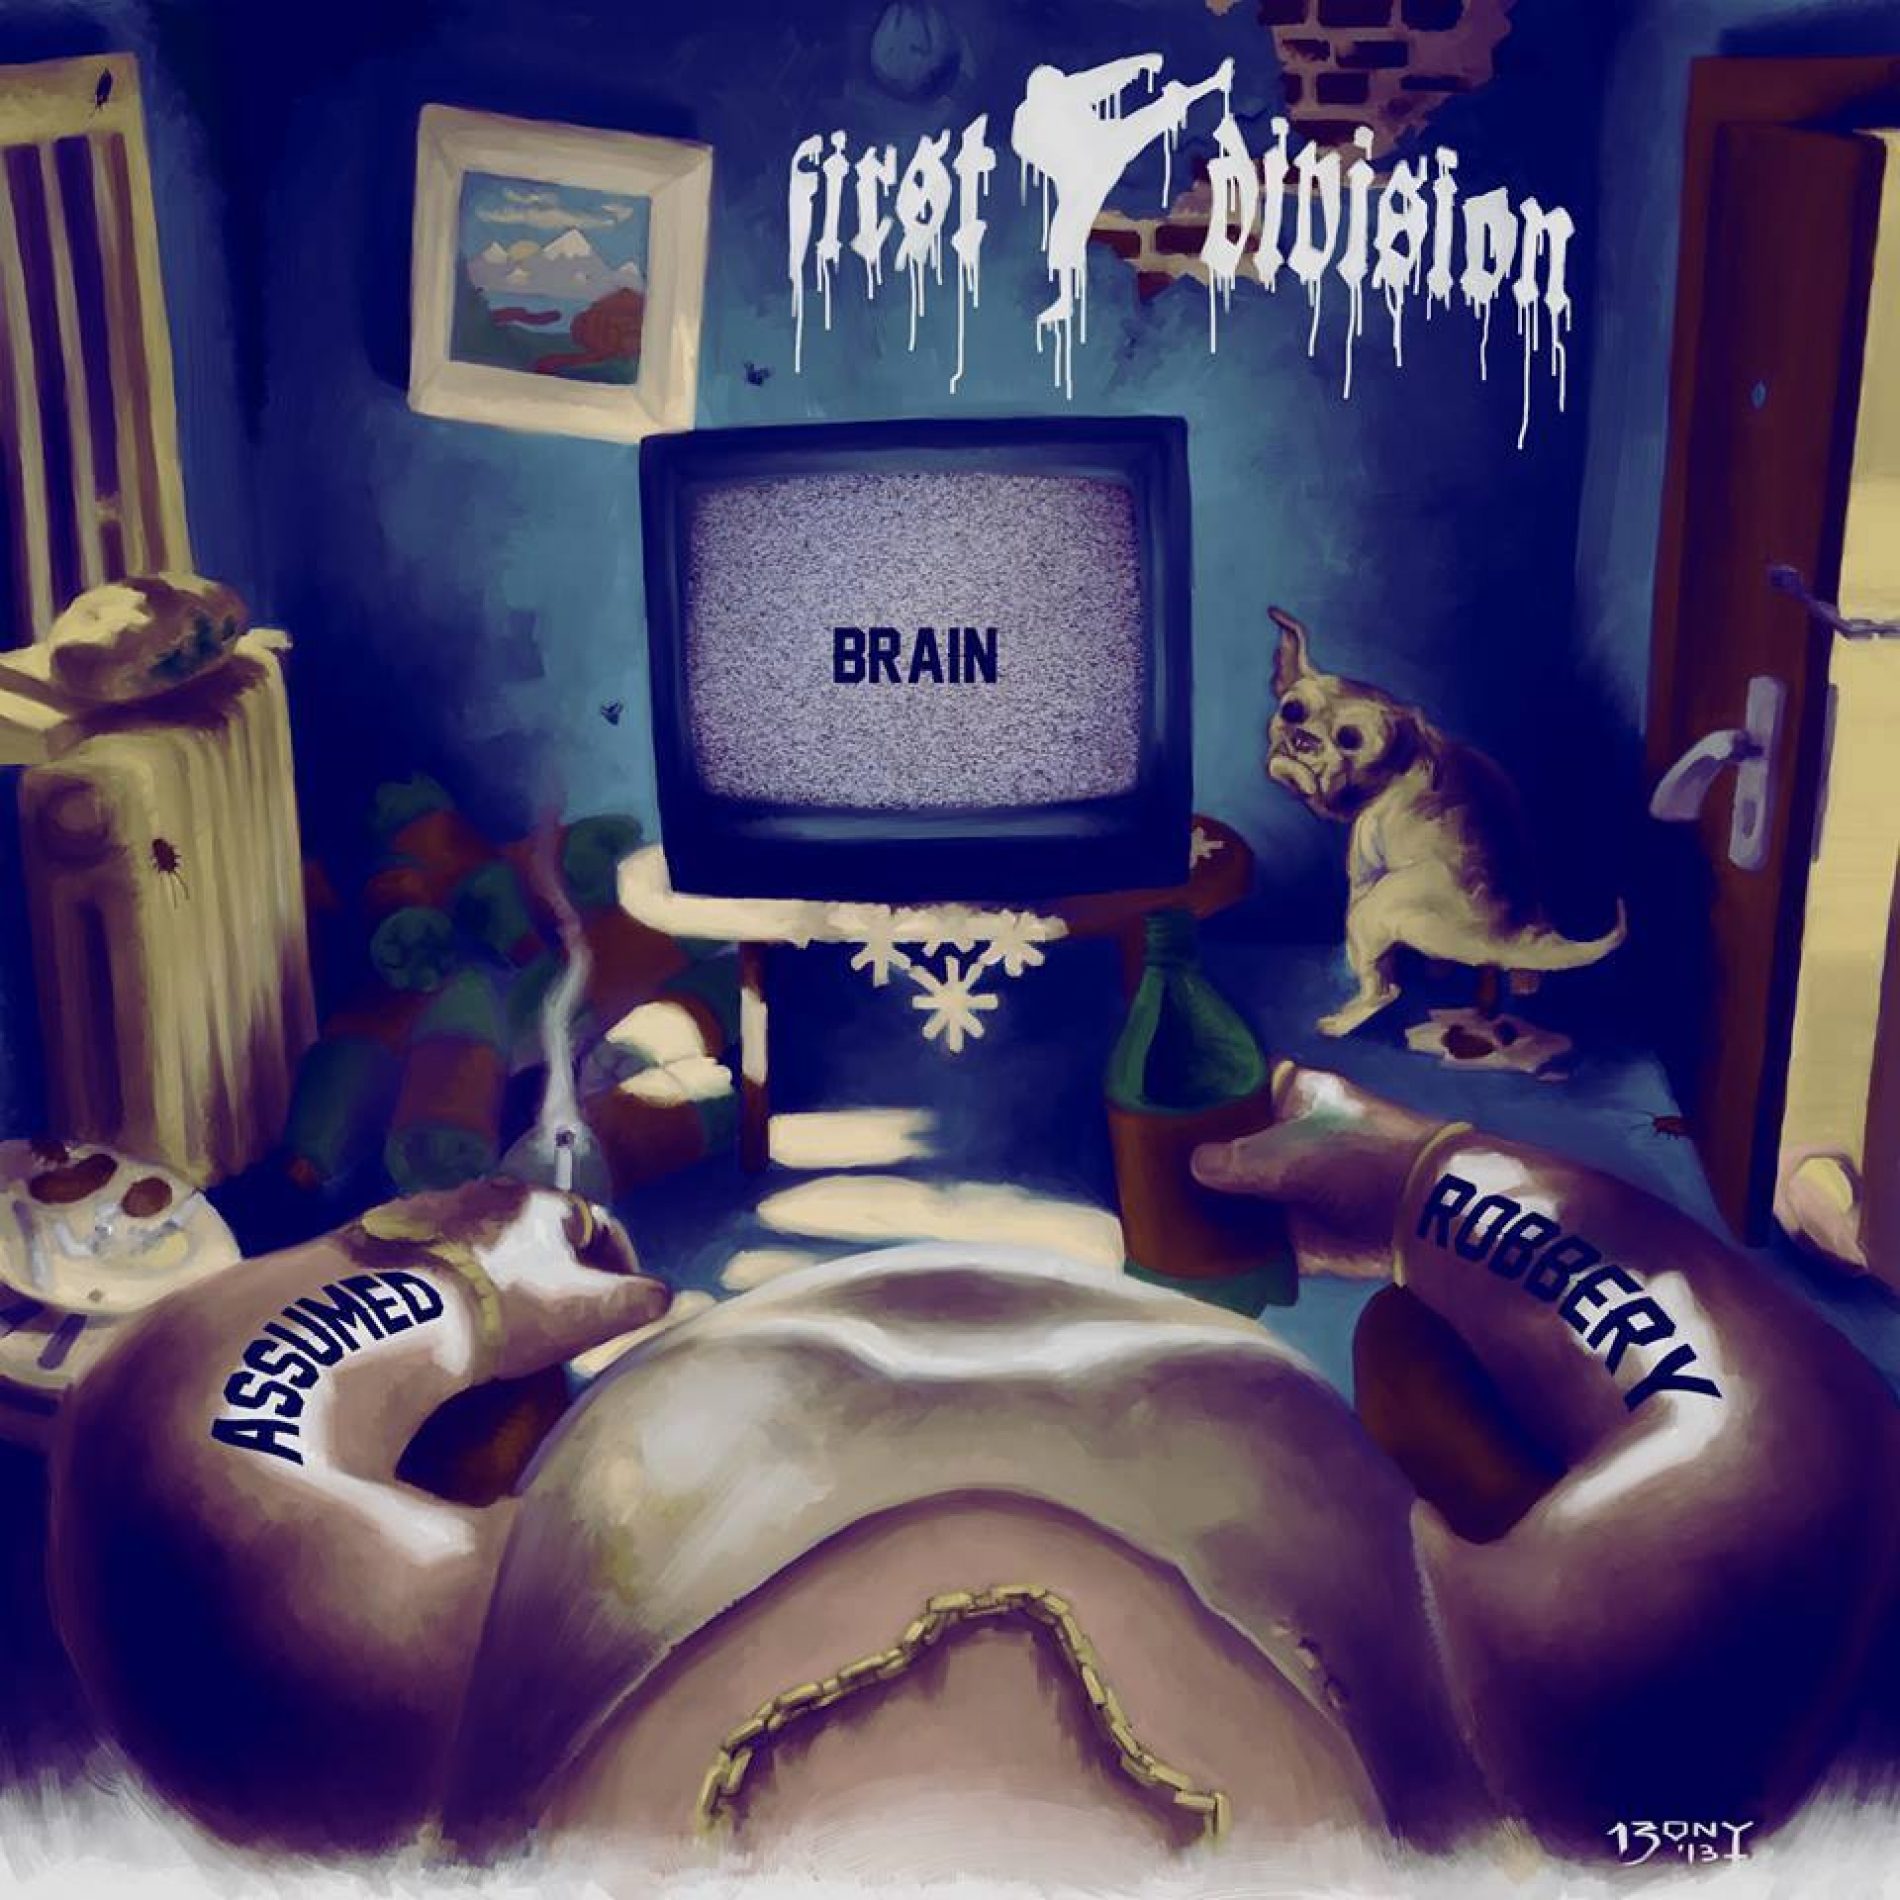 First Division – Assumed Brain Robbery (cronica album)